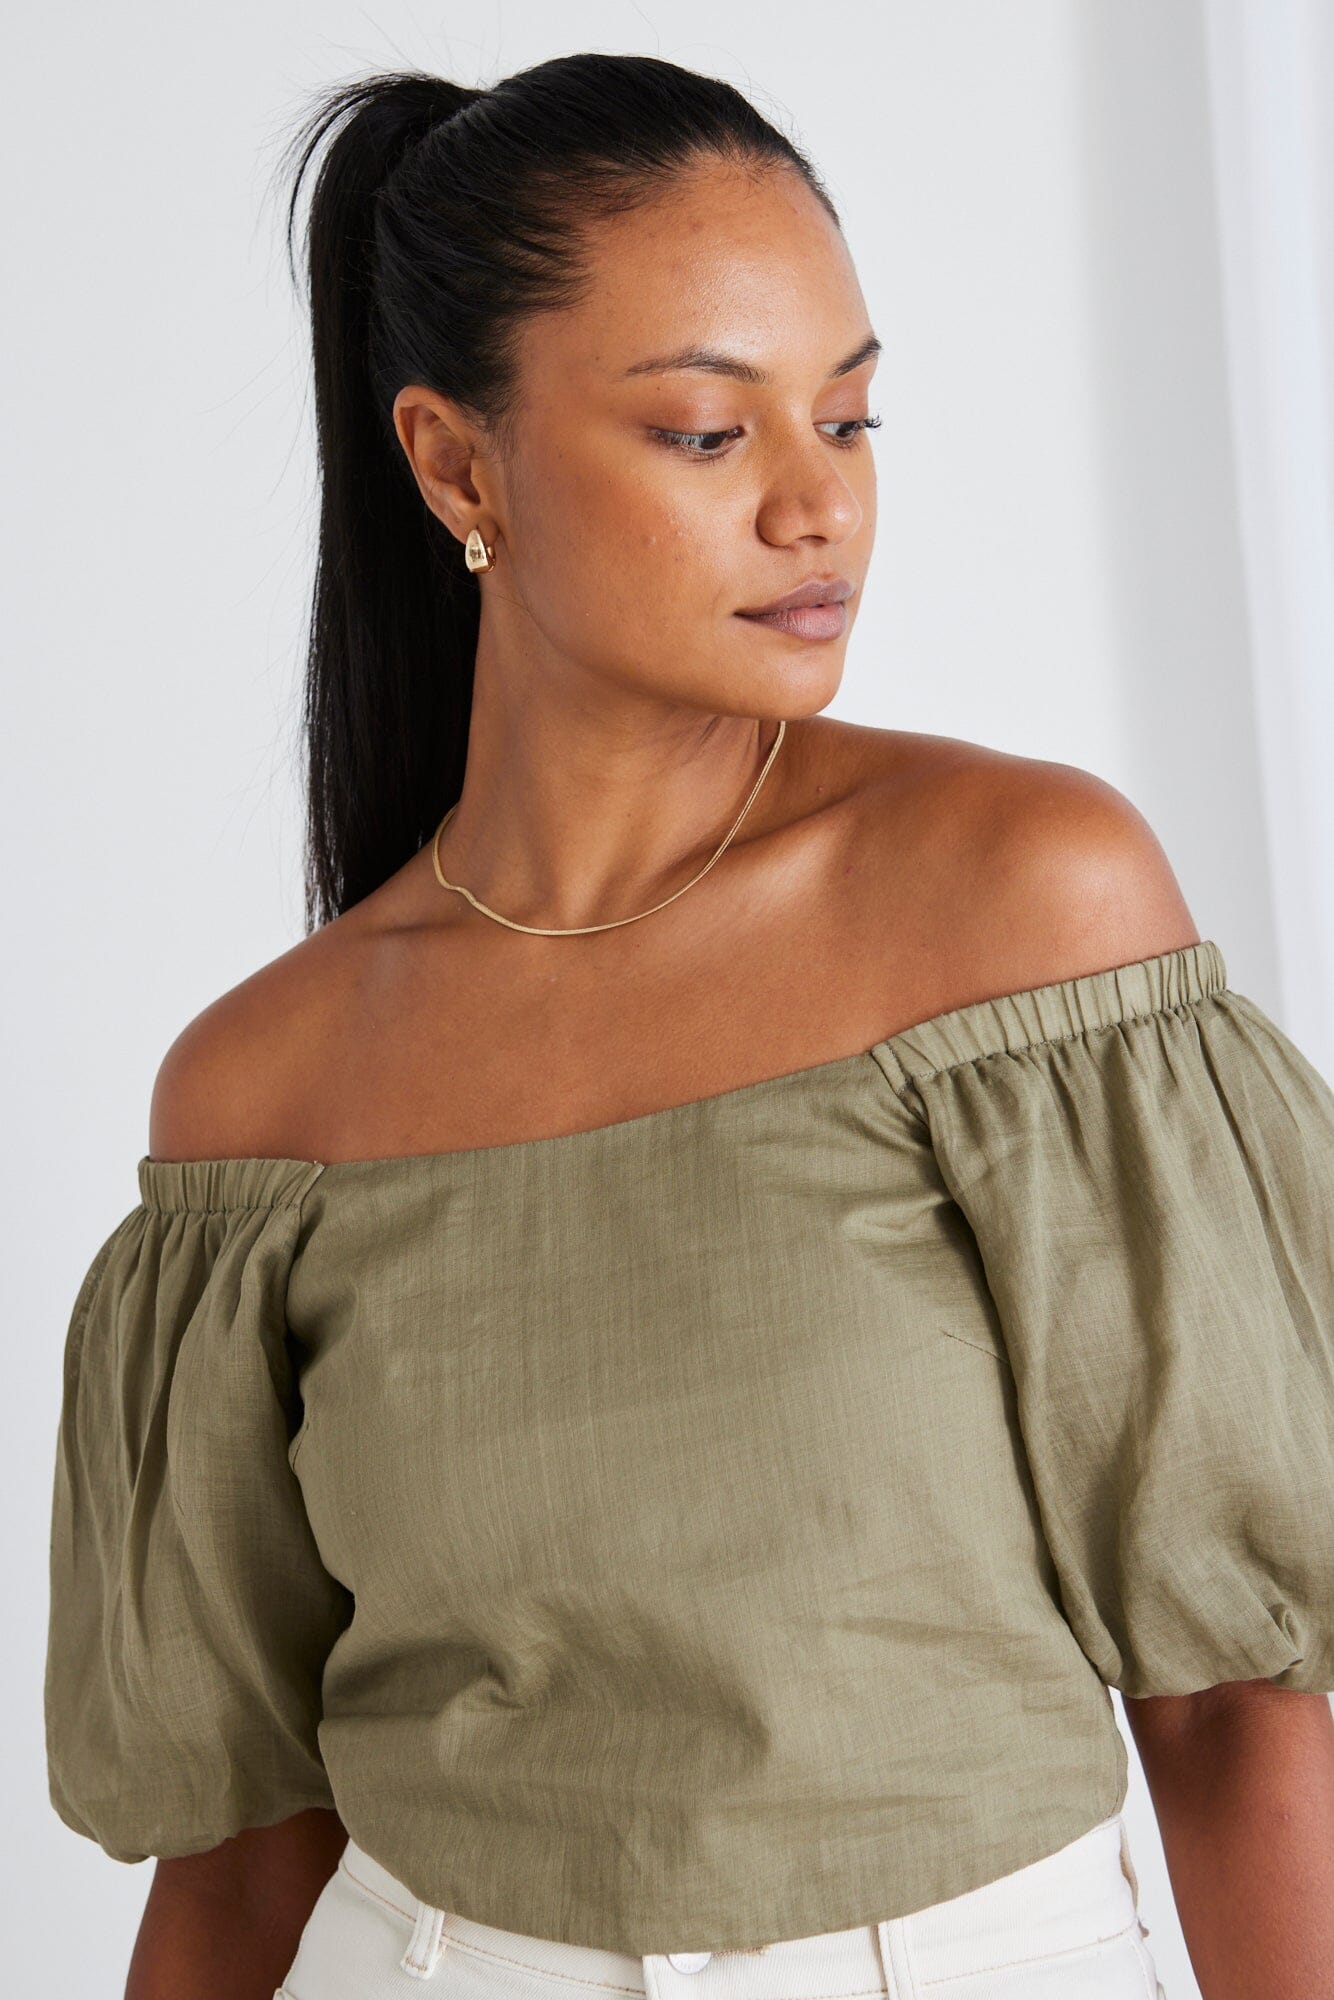 IVY + JACK - Lily Top - Light Khaki *** PRE ORDER / DUE APPROX 23FEB *** Womens IVY + JACK